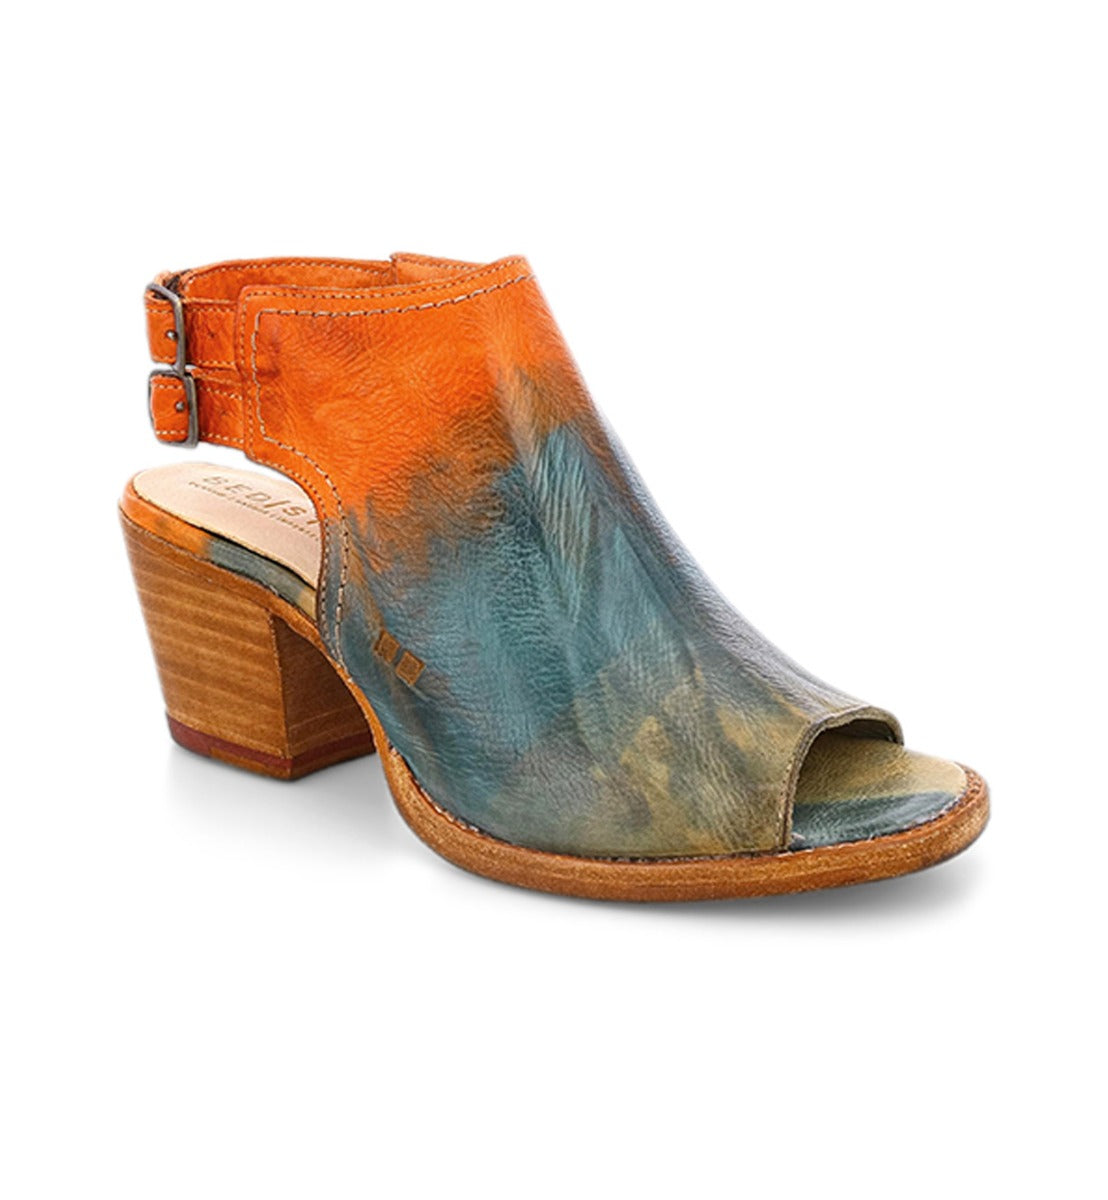 A Bed Stu Ireni women's sandal with an orange and blue color.